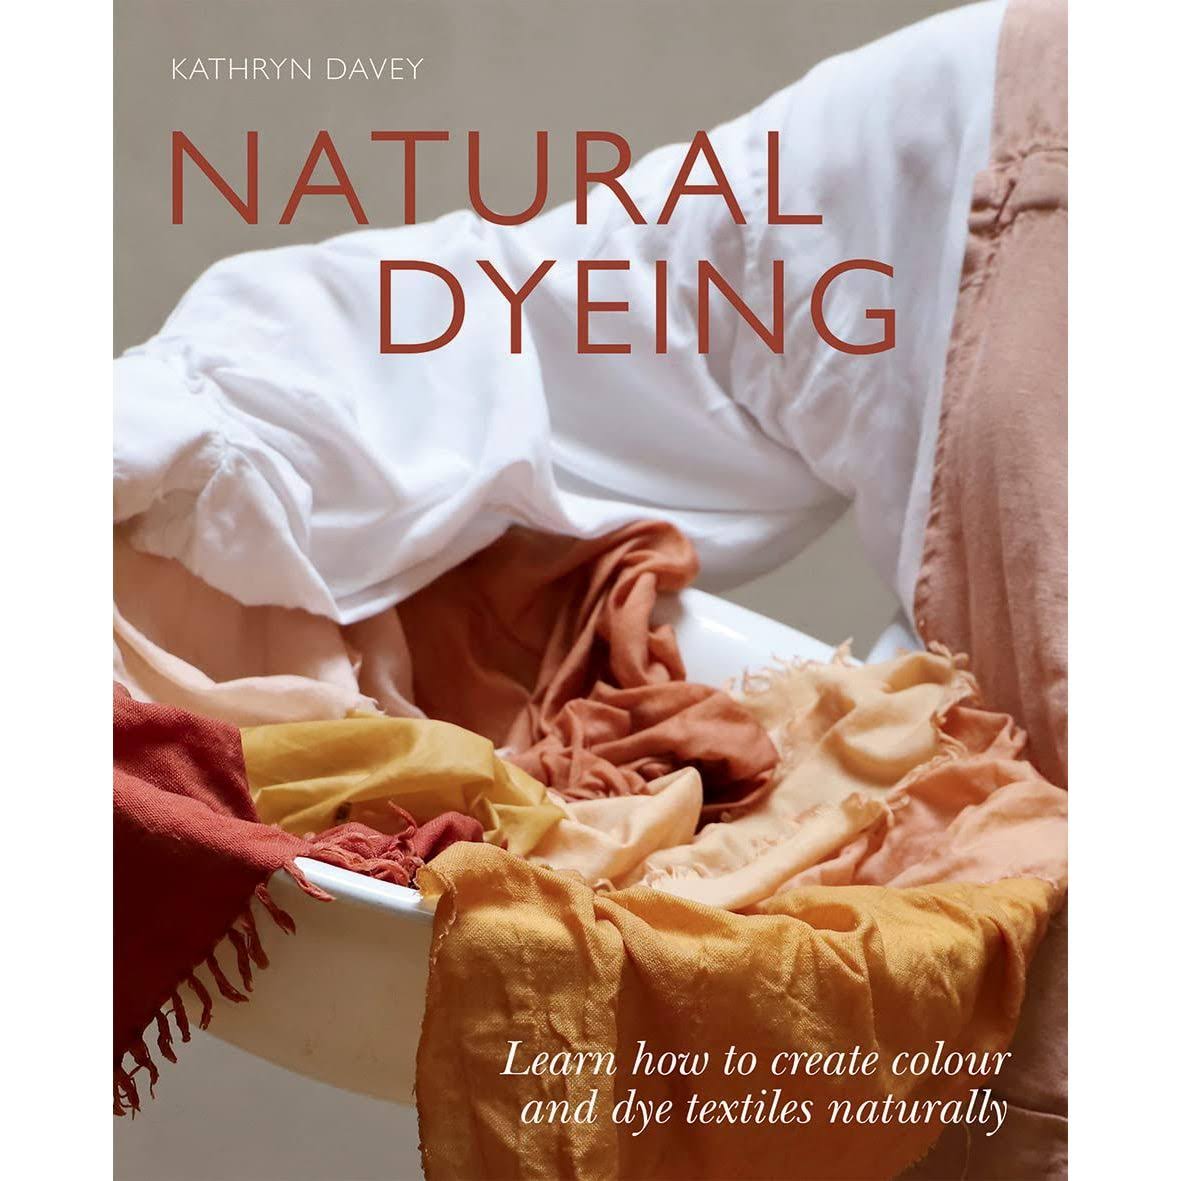 Natural Dyeing by Kathryn Davey